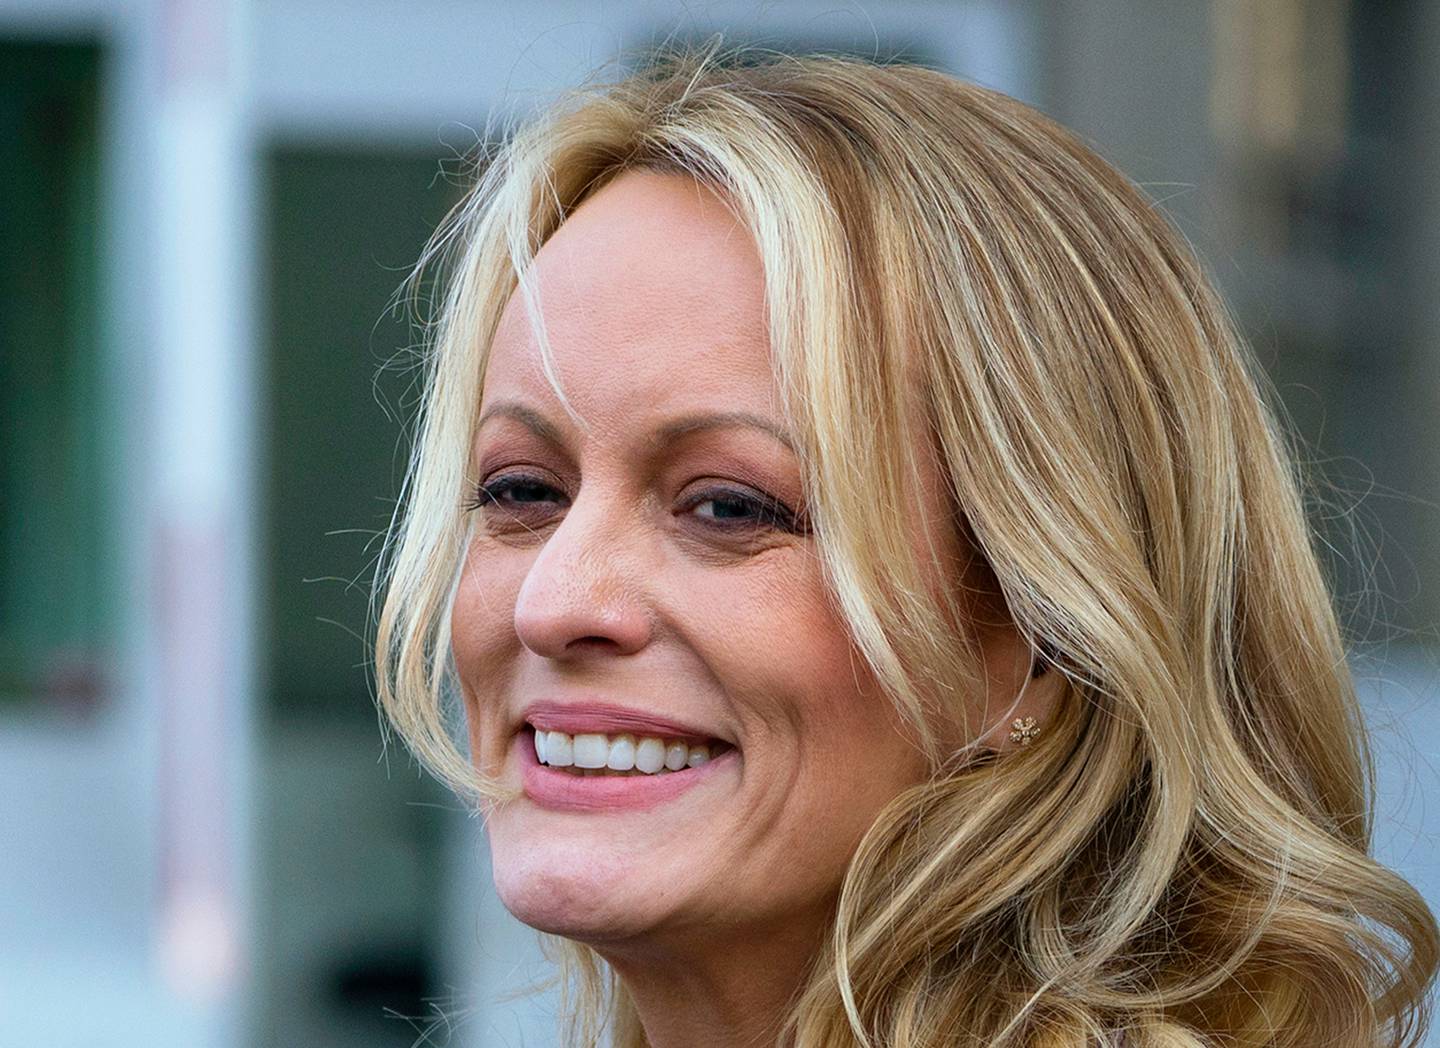 Adult film actress Stormy Daniels has released a tell-all memoir on her ...